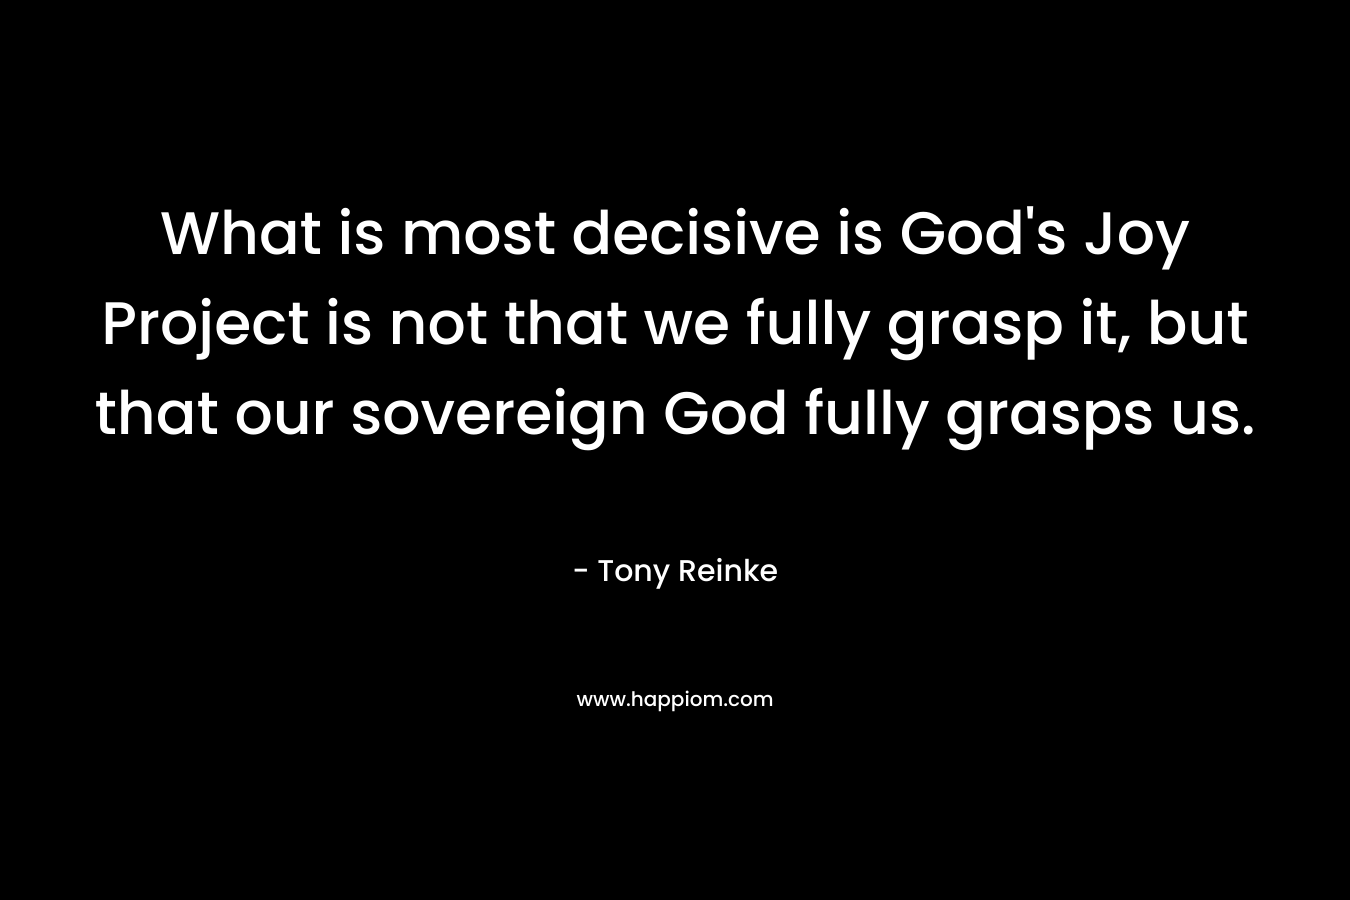 What is most decisive is God’s Joy Project is not that we fully grasp it, but that our sovereign God fully grasps us. – Tony Reinke